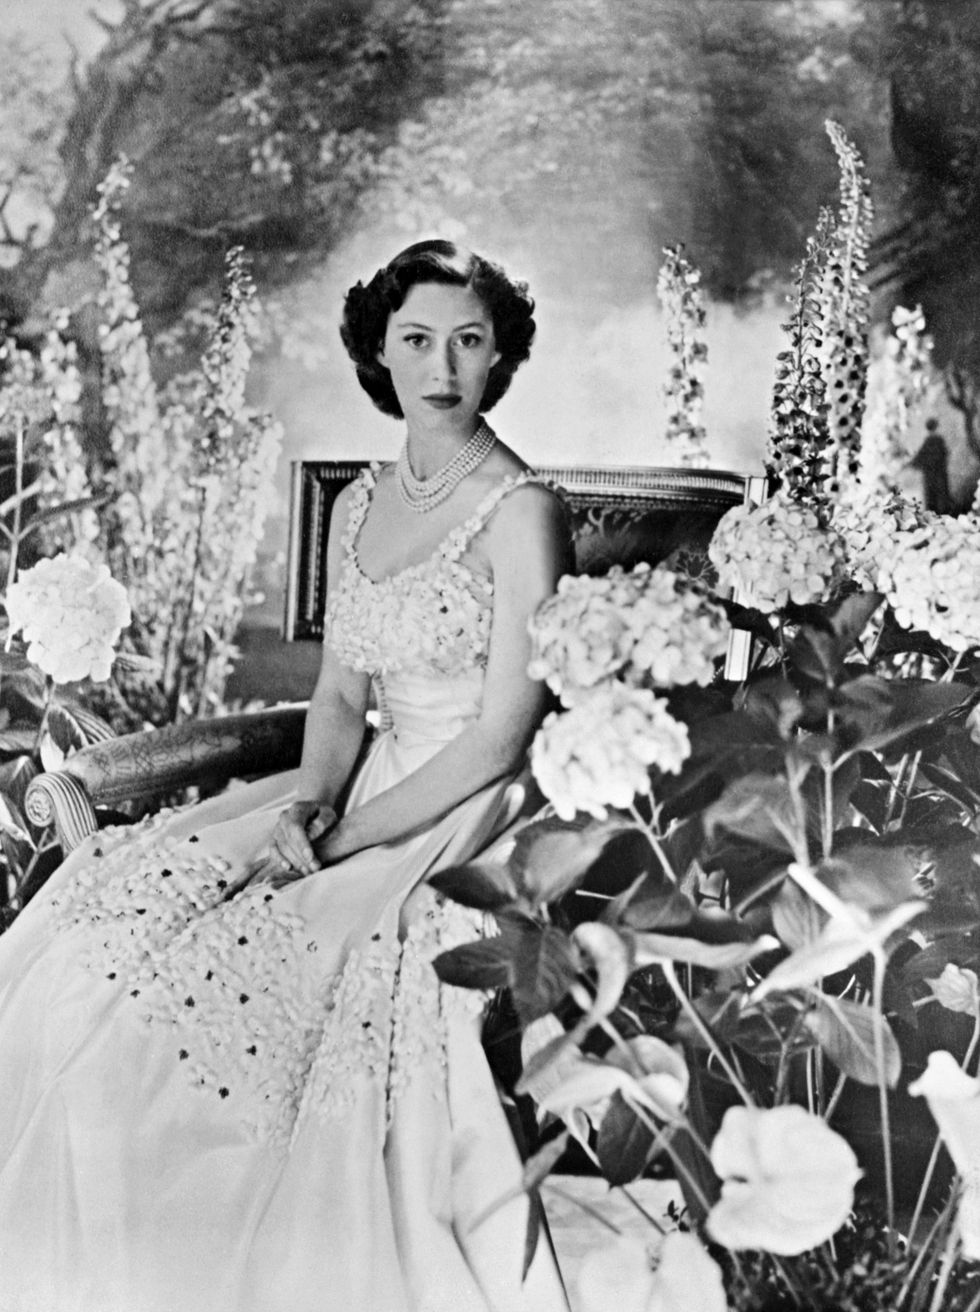 london, united kingdom  picture taken probably in 1940s in london of princess margaret, the youngest sister of future britains queen elizabeth ii princess margaret married in may 1960 the photographer antony armstrong jones who was later created earl of snowdon princess margaret and her husband had two children, son linley, and daughter sarah, but announced their separation in march 1976 when the marriage was officially ended two years later, margaret became the first royal to divorce since henry viii in the 16th century photo credit should read afp via getty images